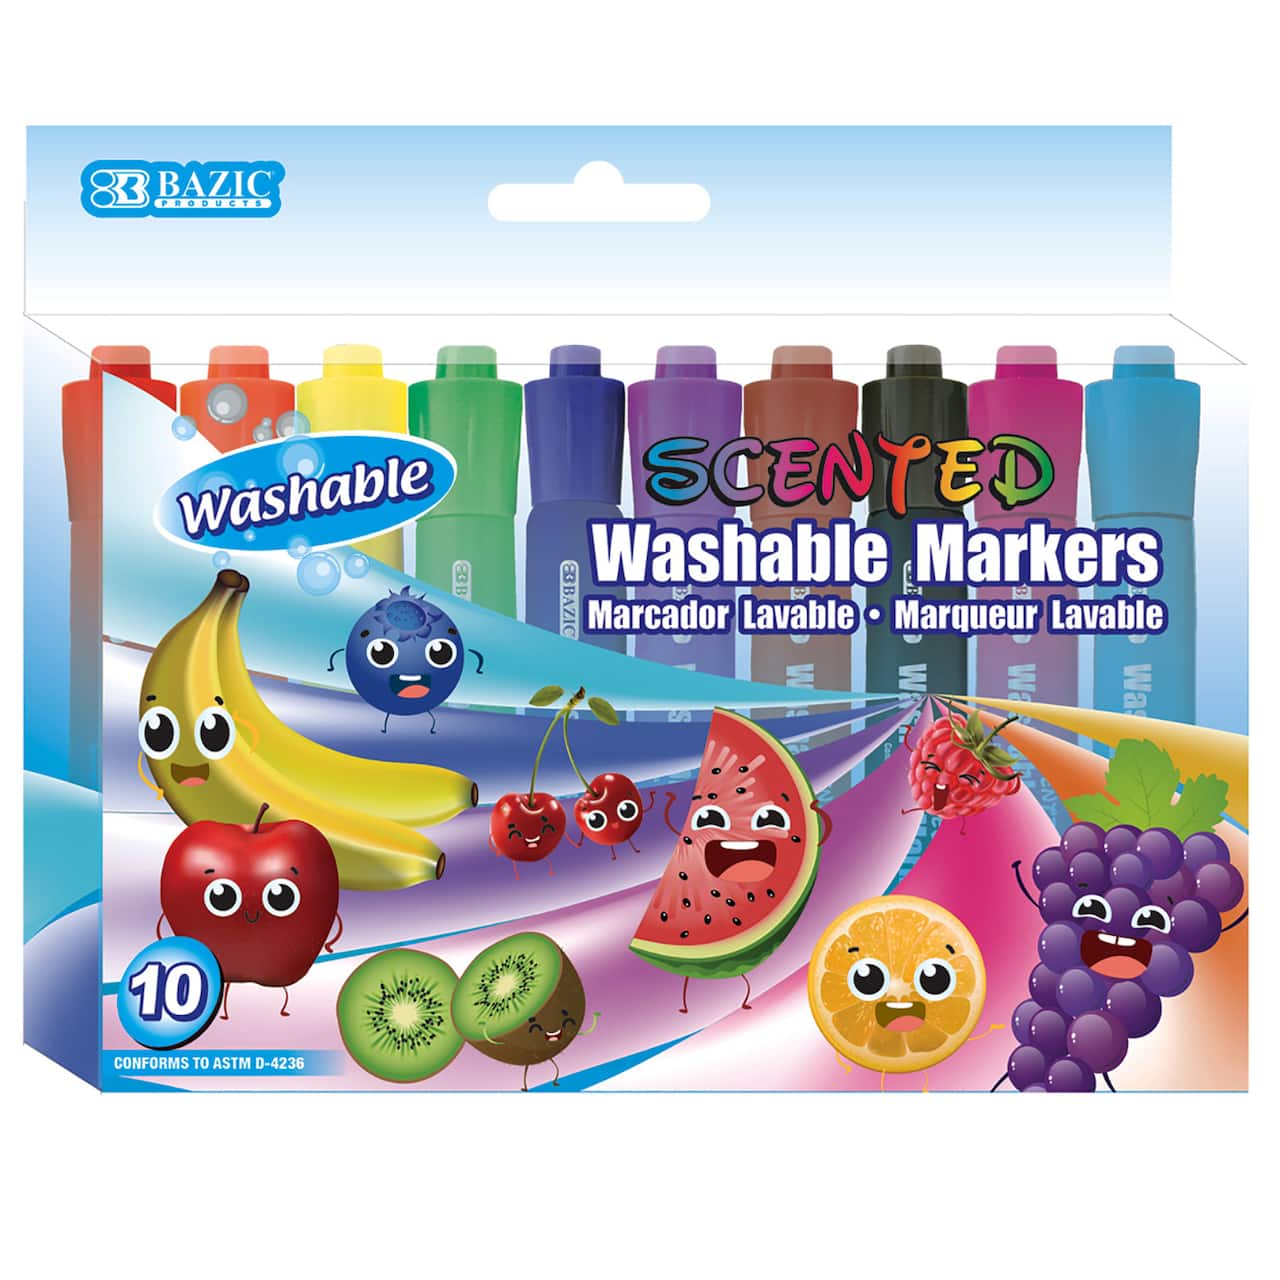 6 Packs: 6 Packs 10 ct. (360 total) BAZIC&#xAE; Scented Washable Markers